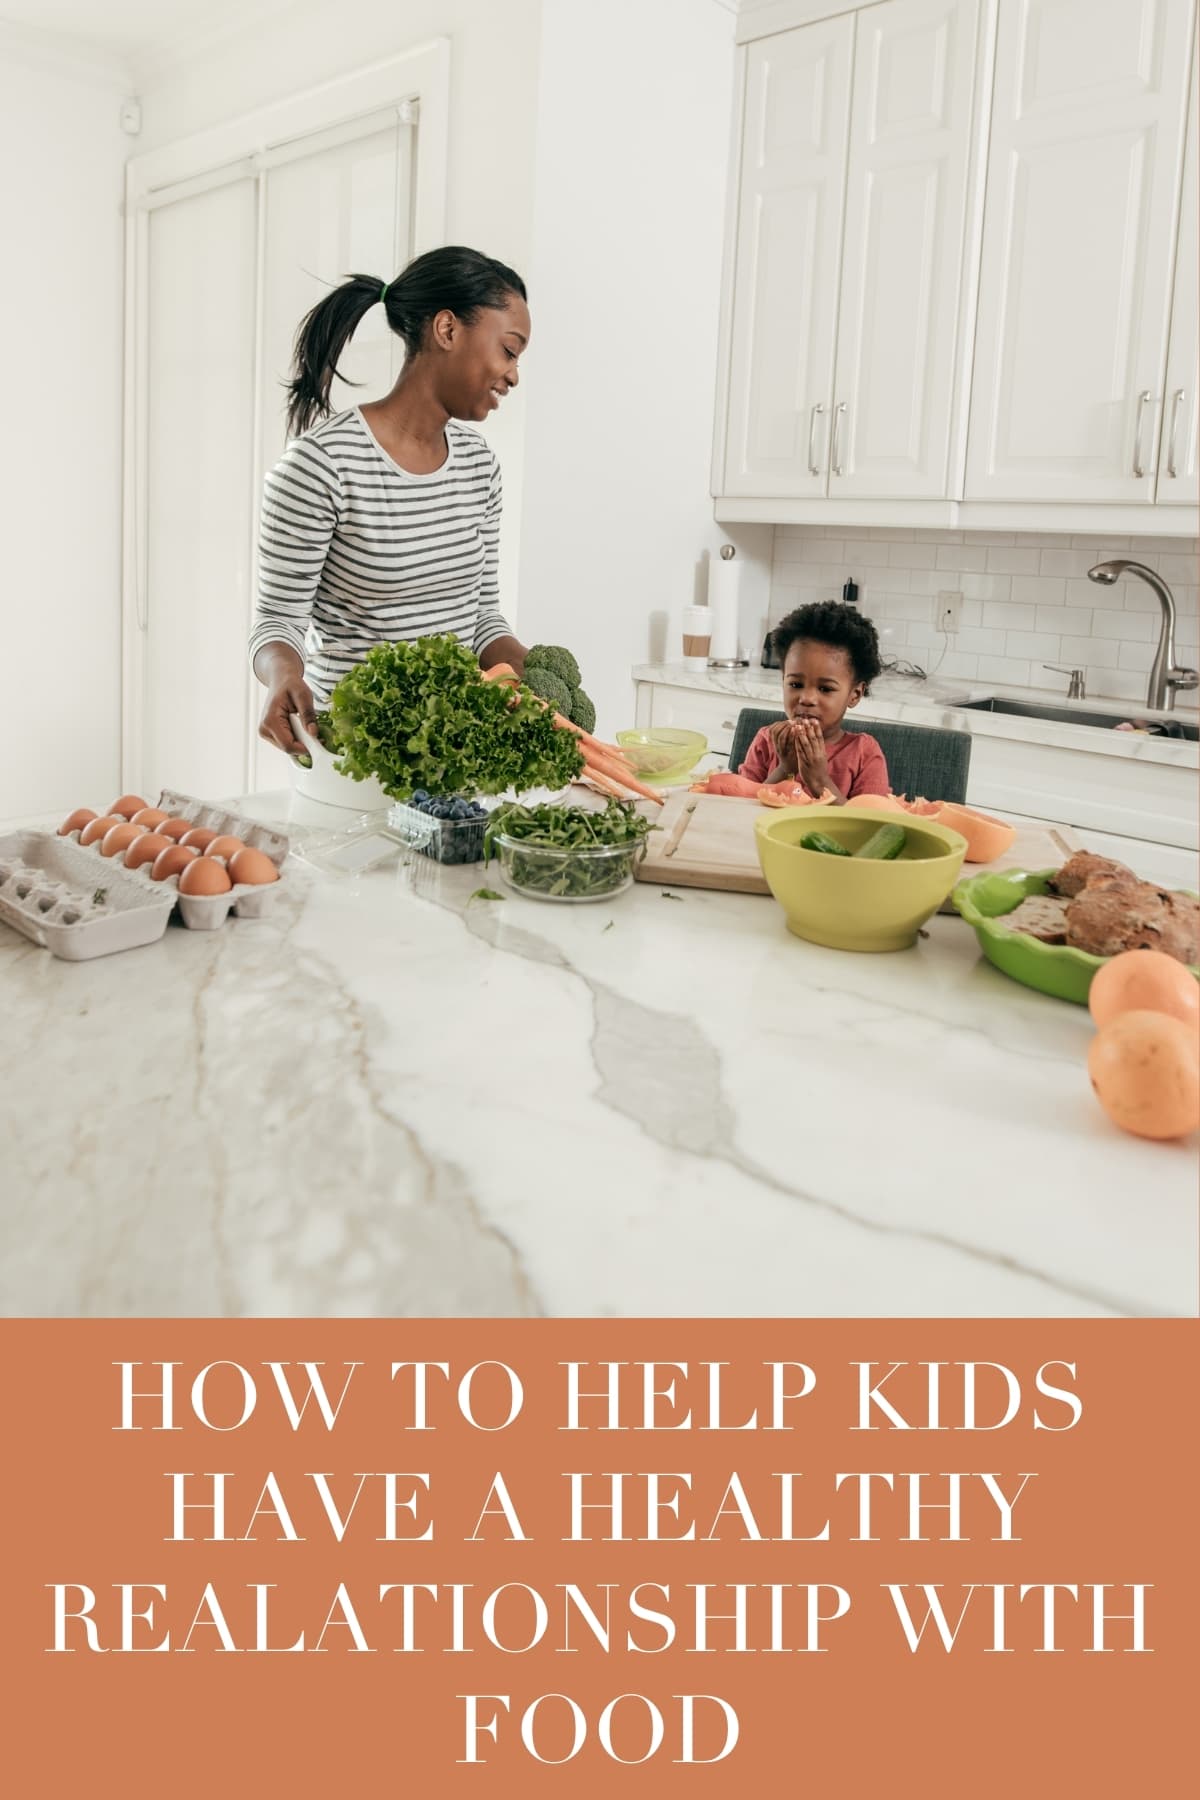 How To Help Kids Foster a Healthy Relationship With Food - Lively Table